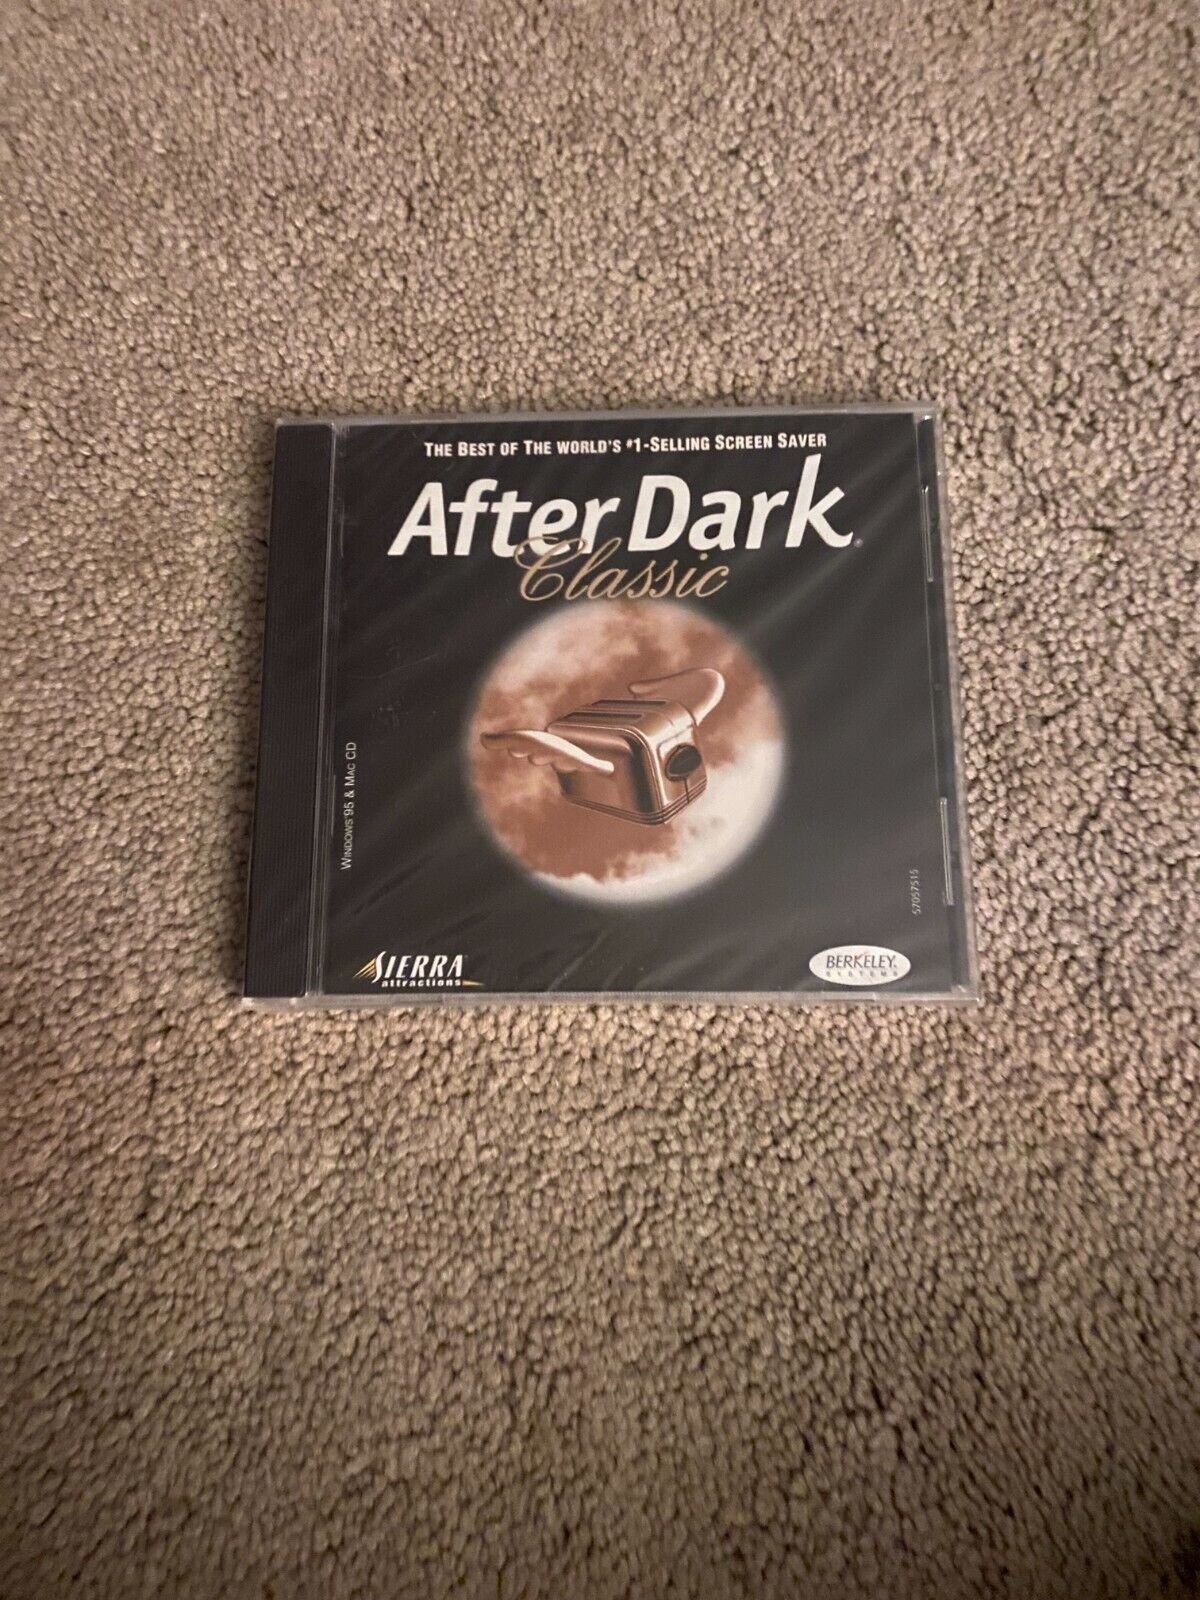 AFTER DARK CLASSIC CD NEW THE BEST OF THE WORLD'S #1-SELLING SCREEN SAVER SIERRA